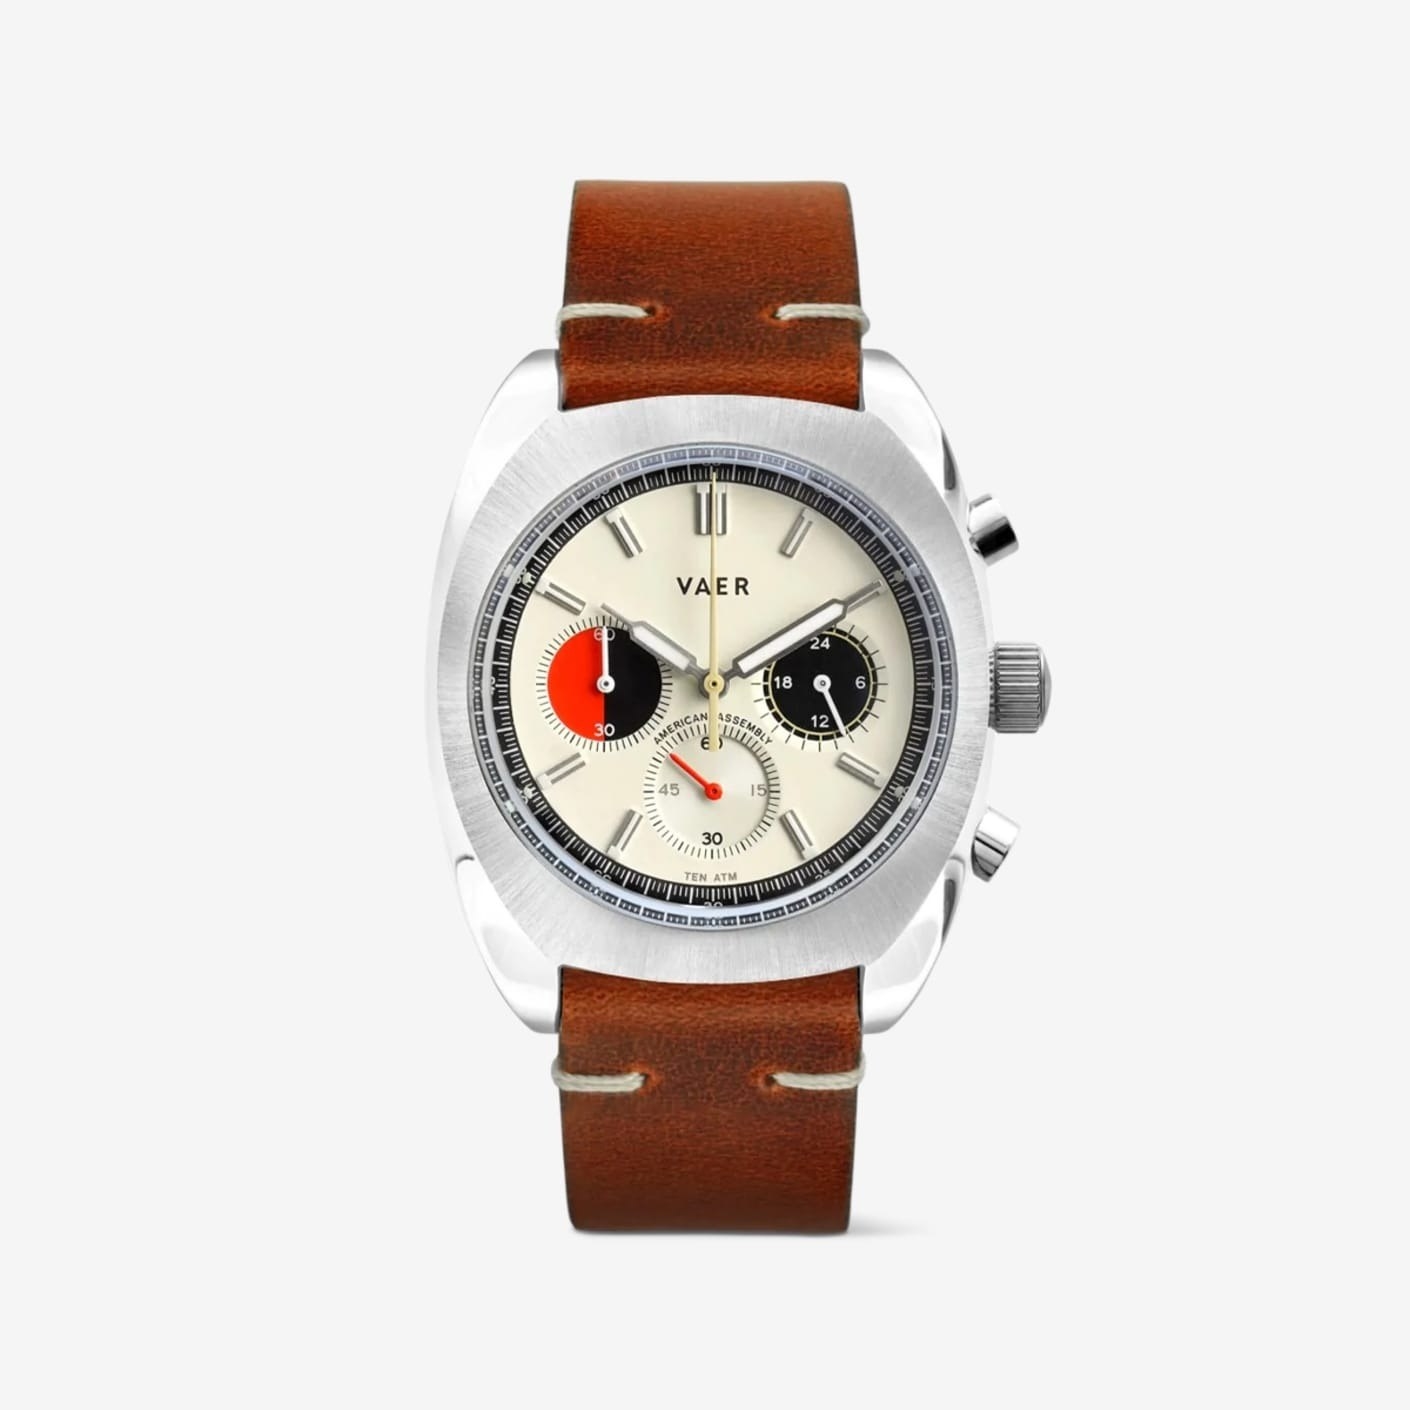 Image of the brown watch